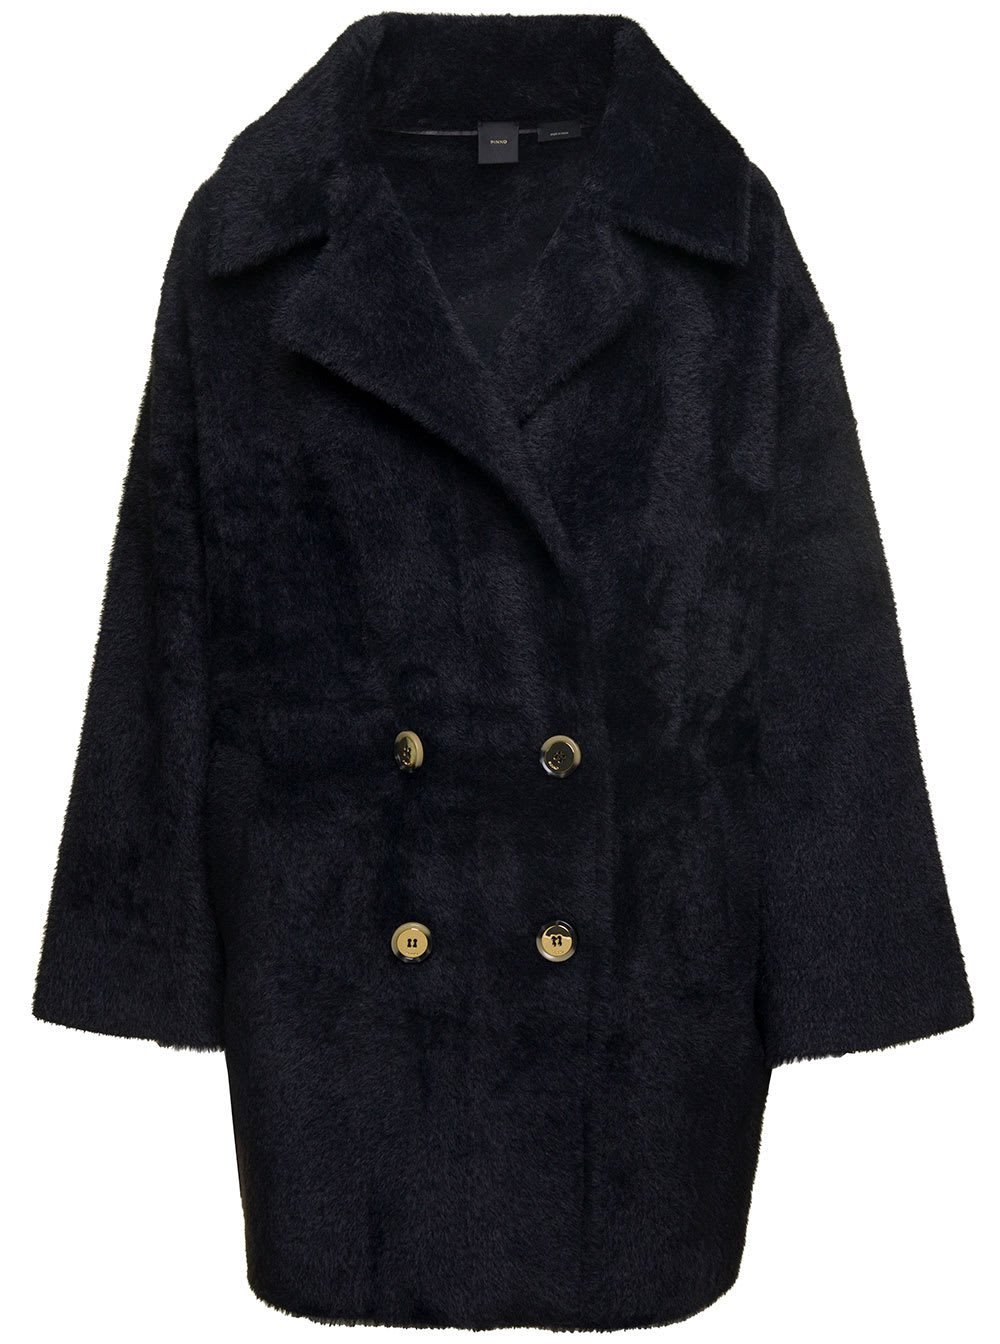 PINKO BLACK DOUBLE-BREASTED COAT WITH WIDE REVERS IN ECO FUR WOMAN